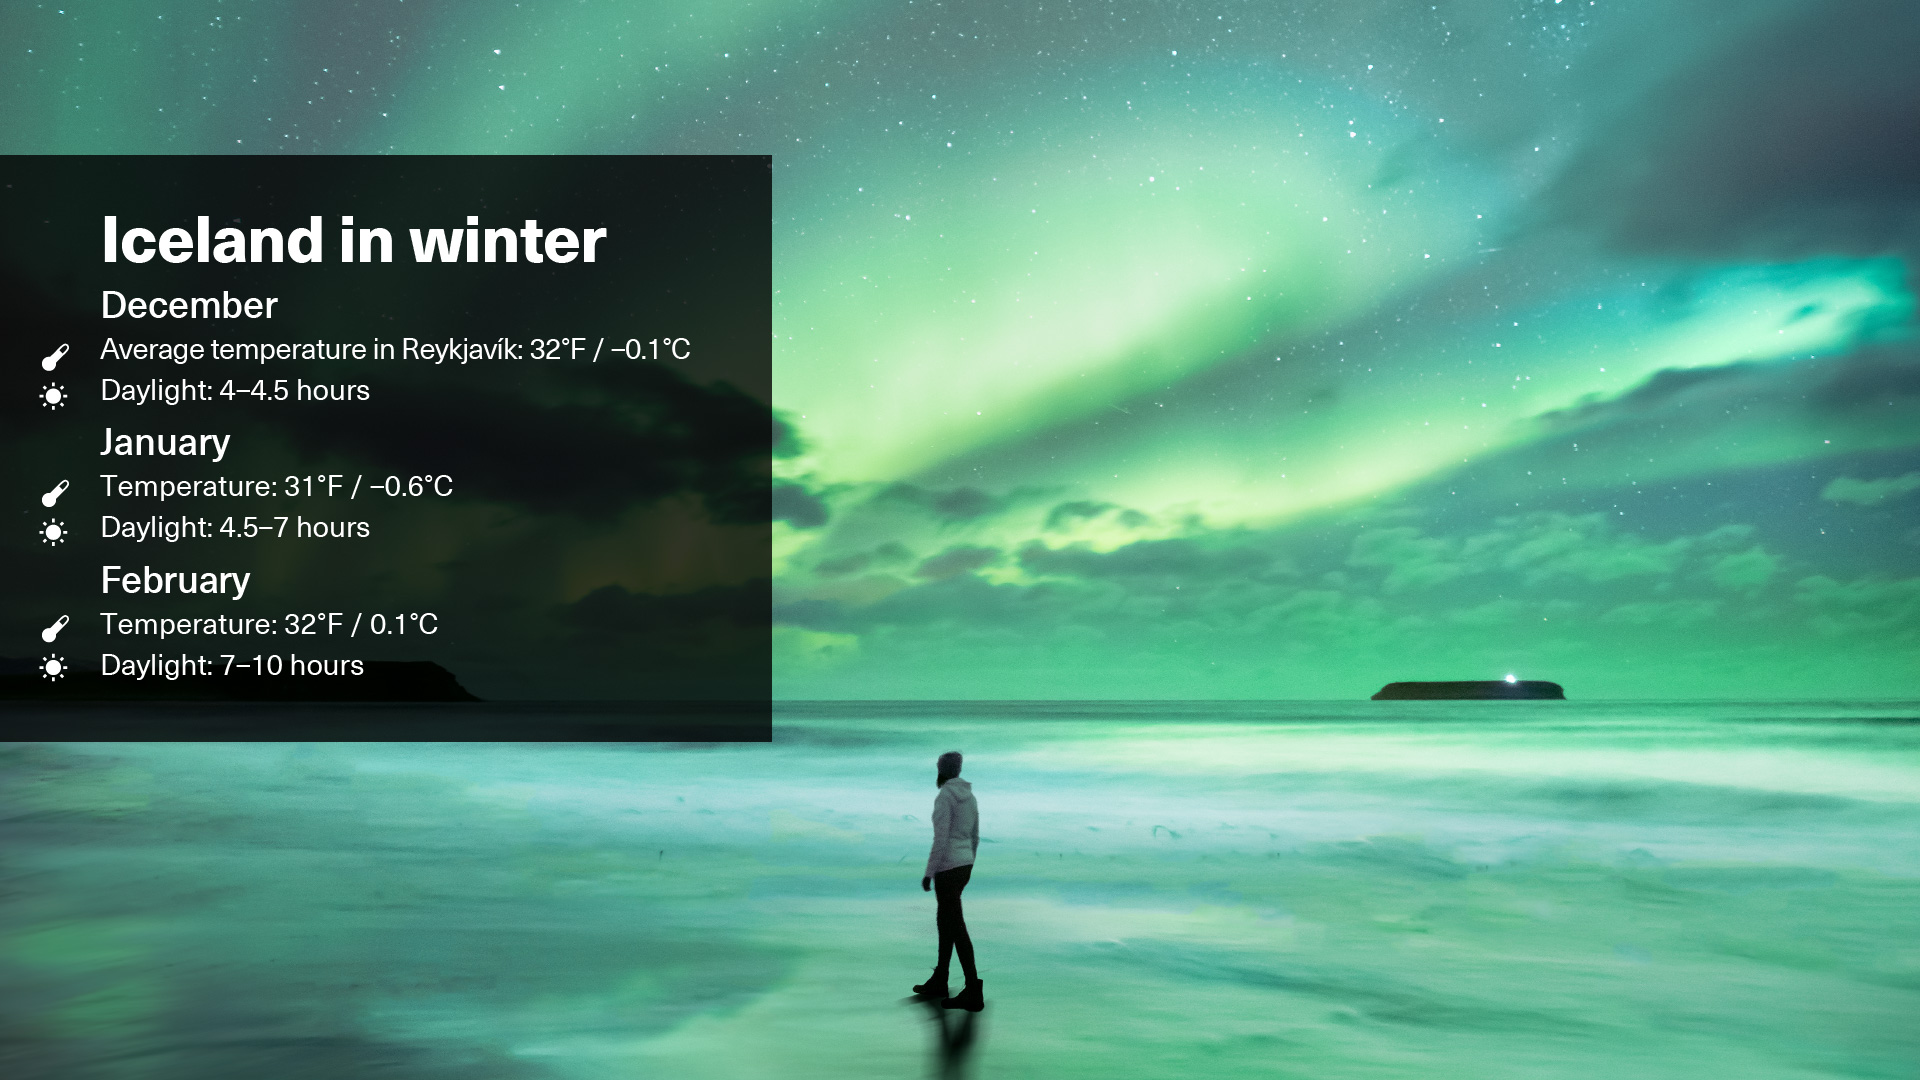 Winter weather in Iceland, displayed on a graphic illustrative image. Image shows the temperature and daylight hours in December, January and February in Iceland